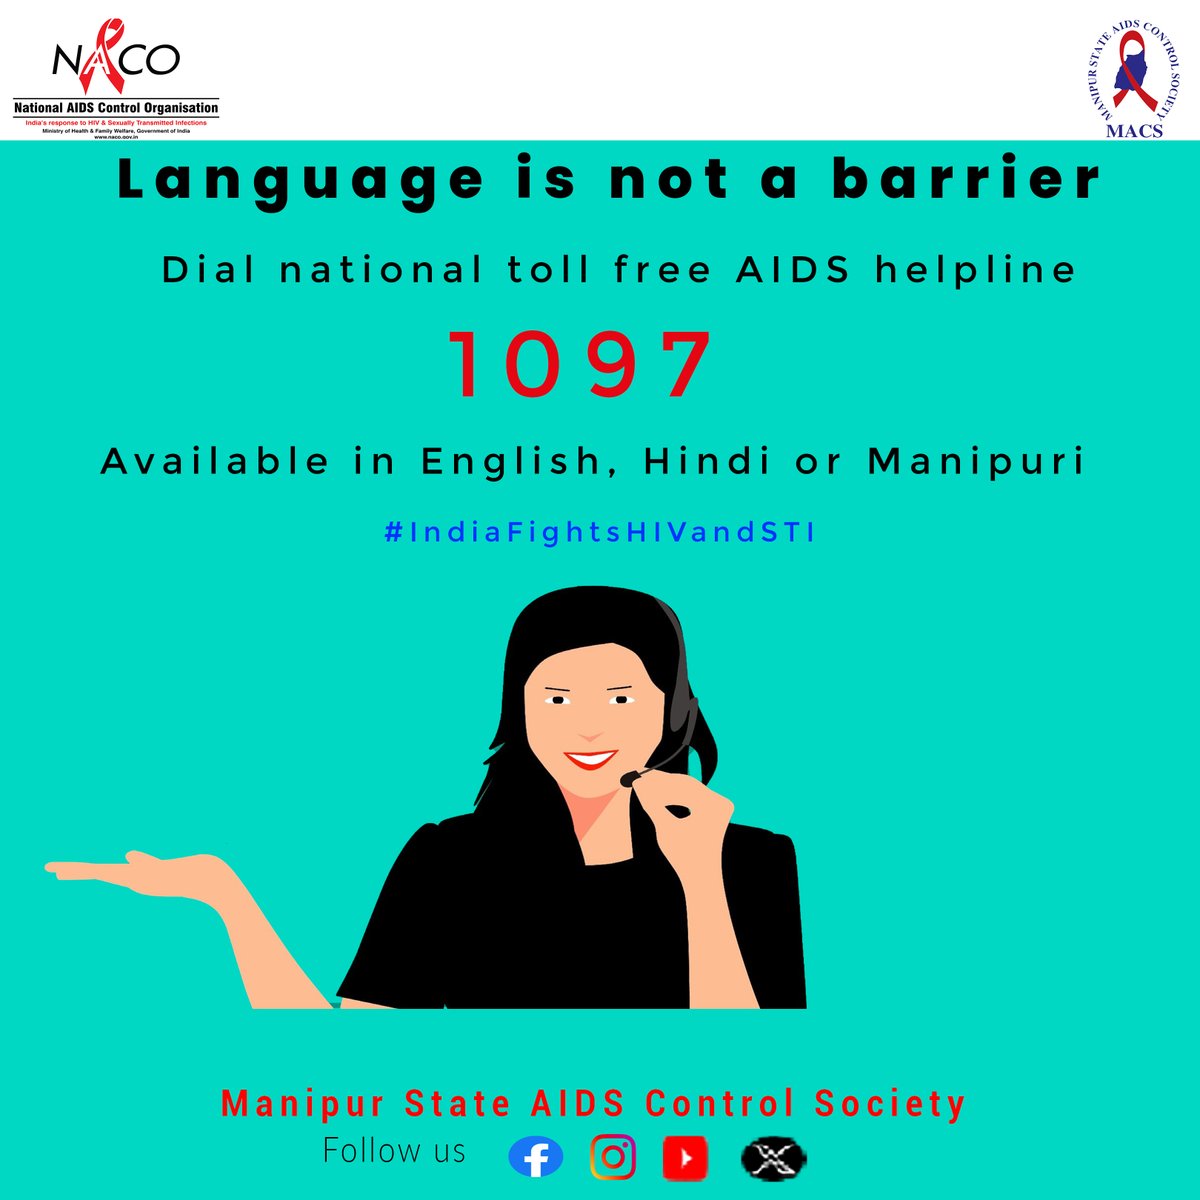 Call the national toll free AIDS Helpline 1097 in your own language.
Get reliable information and support from trained professionals.
#IndiaFightsHIVandSTI